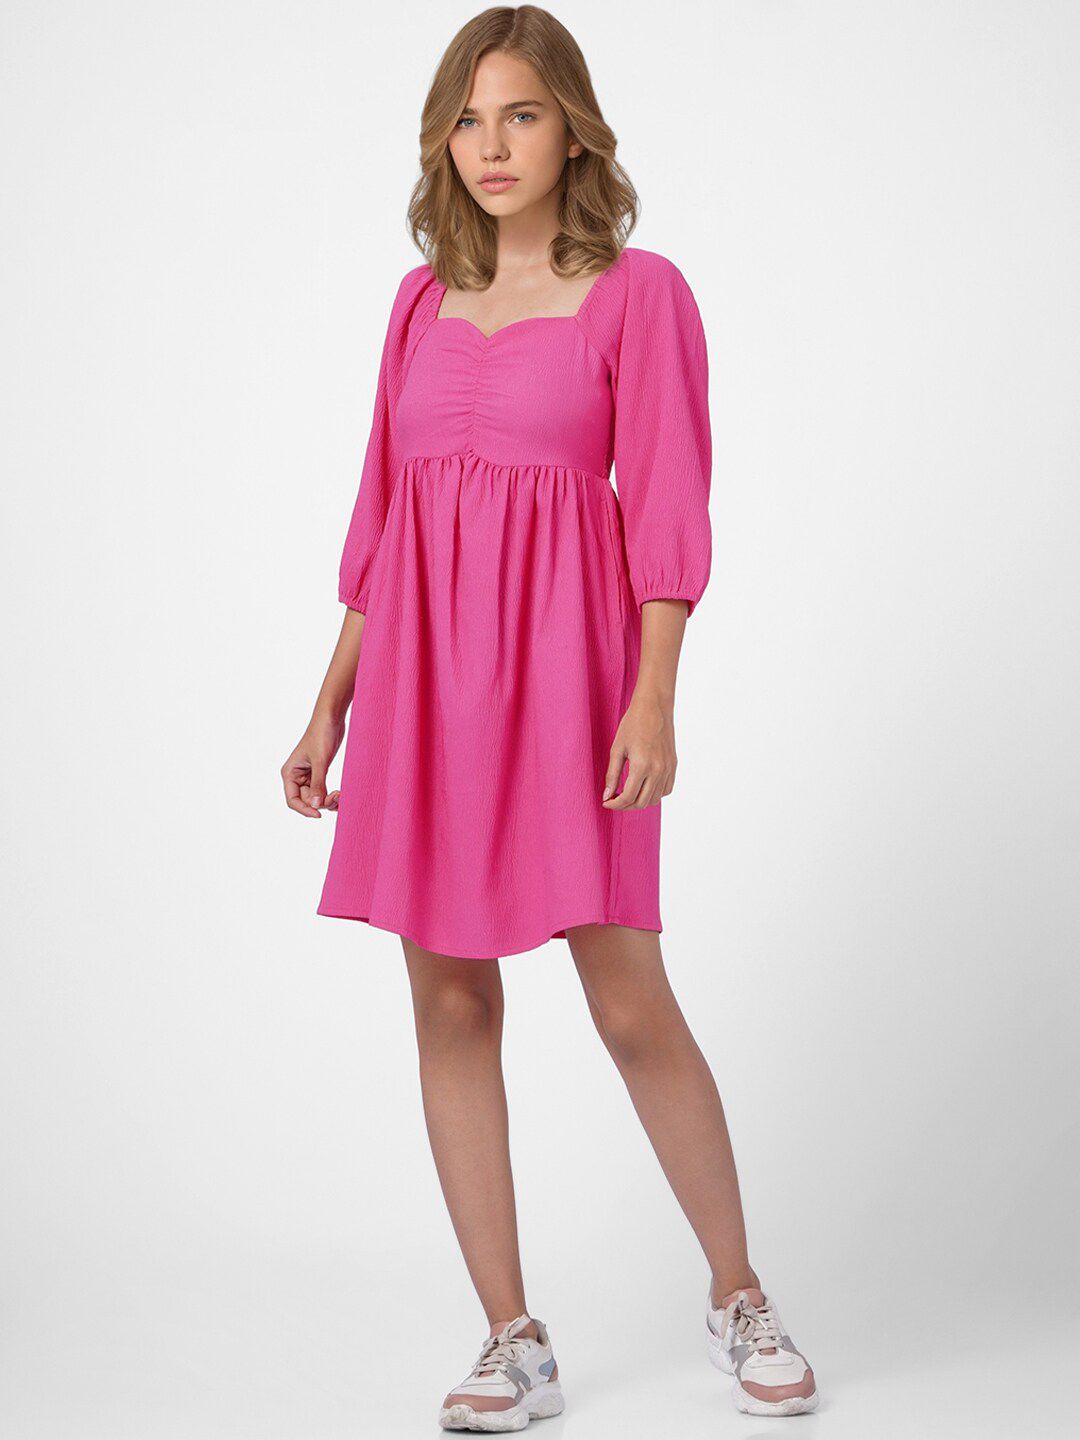 ONLY Pink Dress Price in India